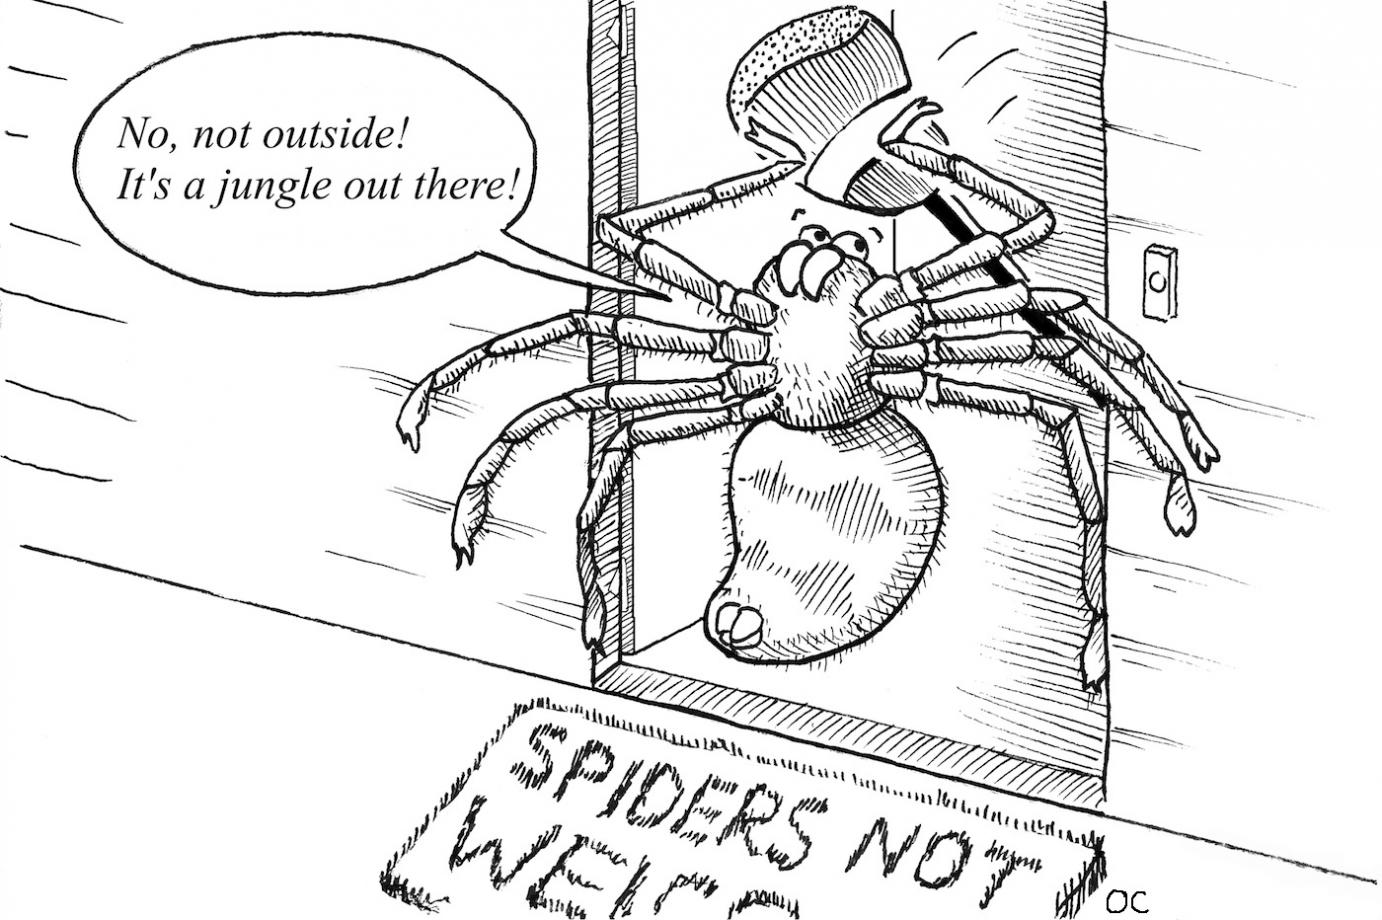 A comic of a spider banging on a front door